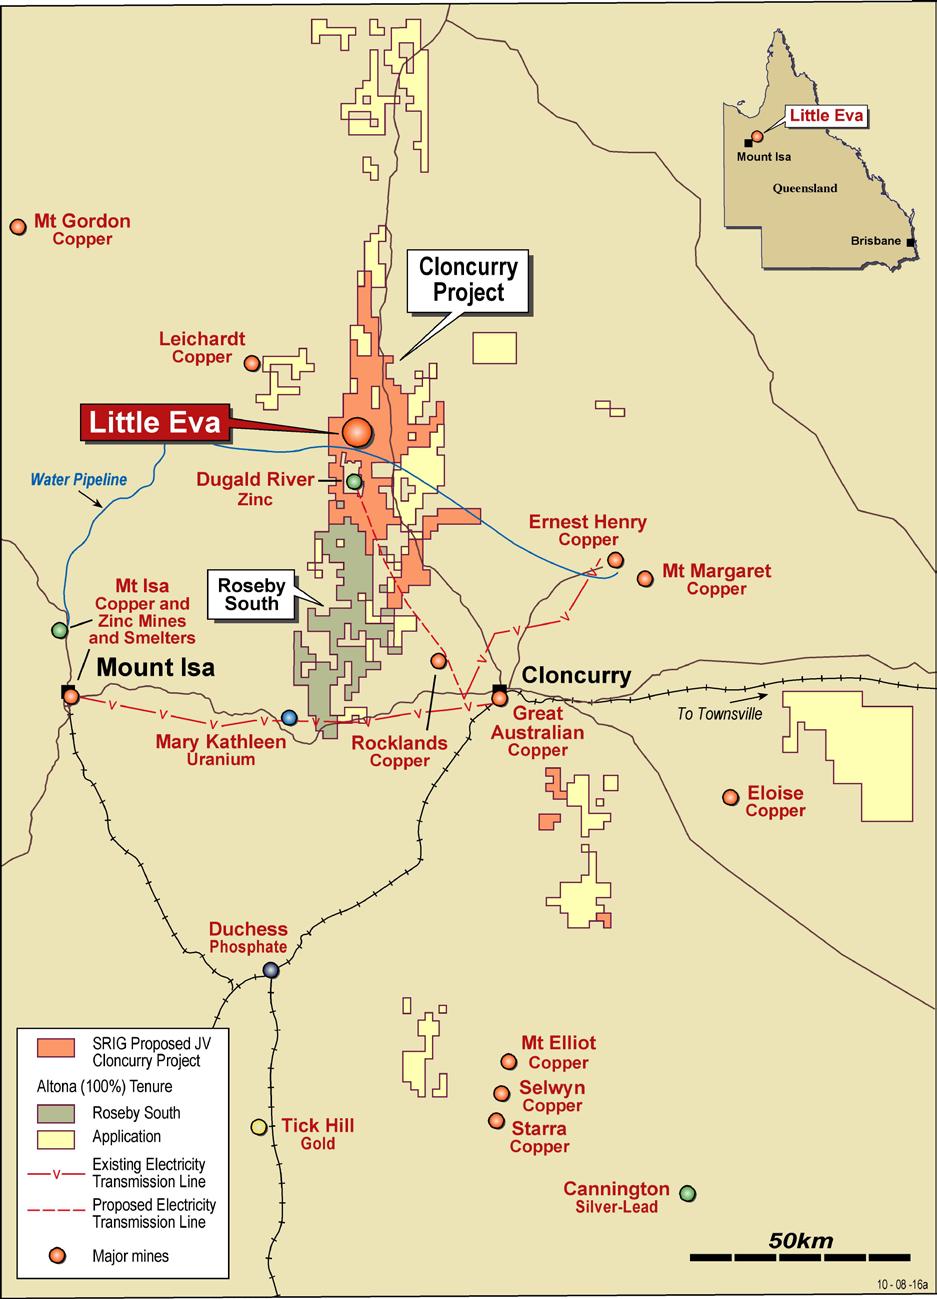 Figure 1: Map showing Project Areas and